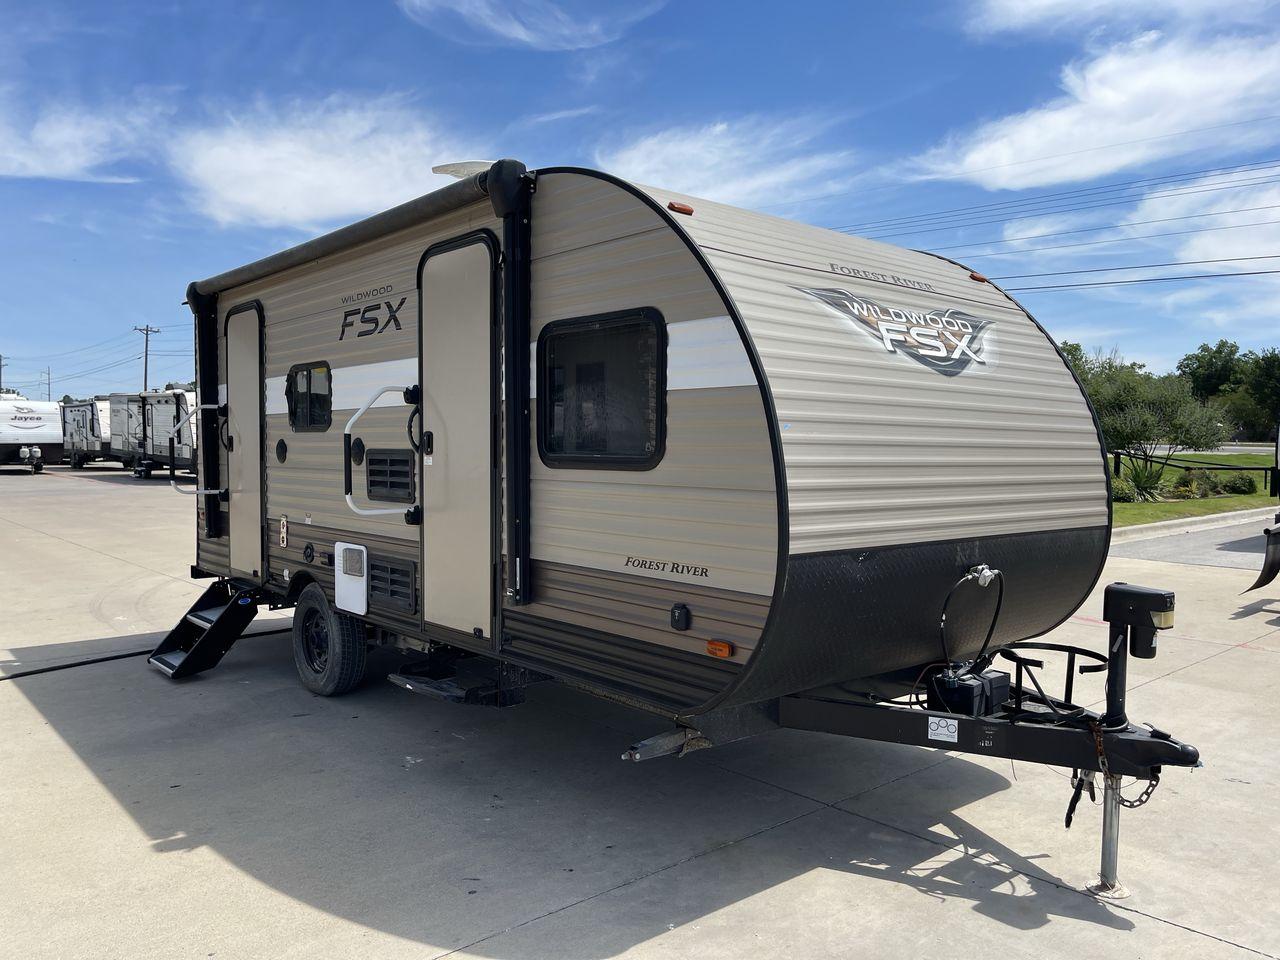 2018 WILDWOOD FSX 190SS (4X4TWDU1XJY) , Length: 22.58 ft. | Dry Weight: 3,474 lbs. | Slides: 1 transmission, located at 4319 N Main Street, Cleburne, TX, 76033, (817) 221-0660, 32.435829, -97.384178 - With the 2018 Wildwood FSX 190SS Travel Trailer, a model that flawlessly strikes the right mix between utility and convenience, set out on a small yet cozy journey. With a length of 22.58 feet, this travel trailer is crafted to offer a comfortable and pleasant journey on the road. With a robust wood - Photo #21